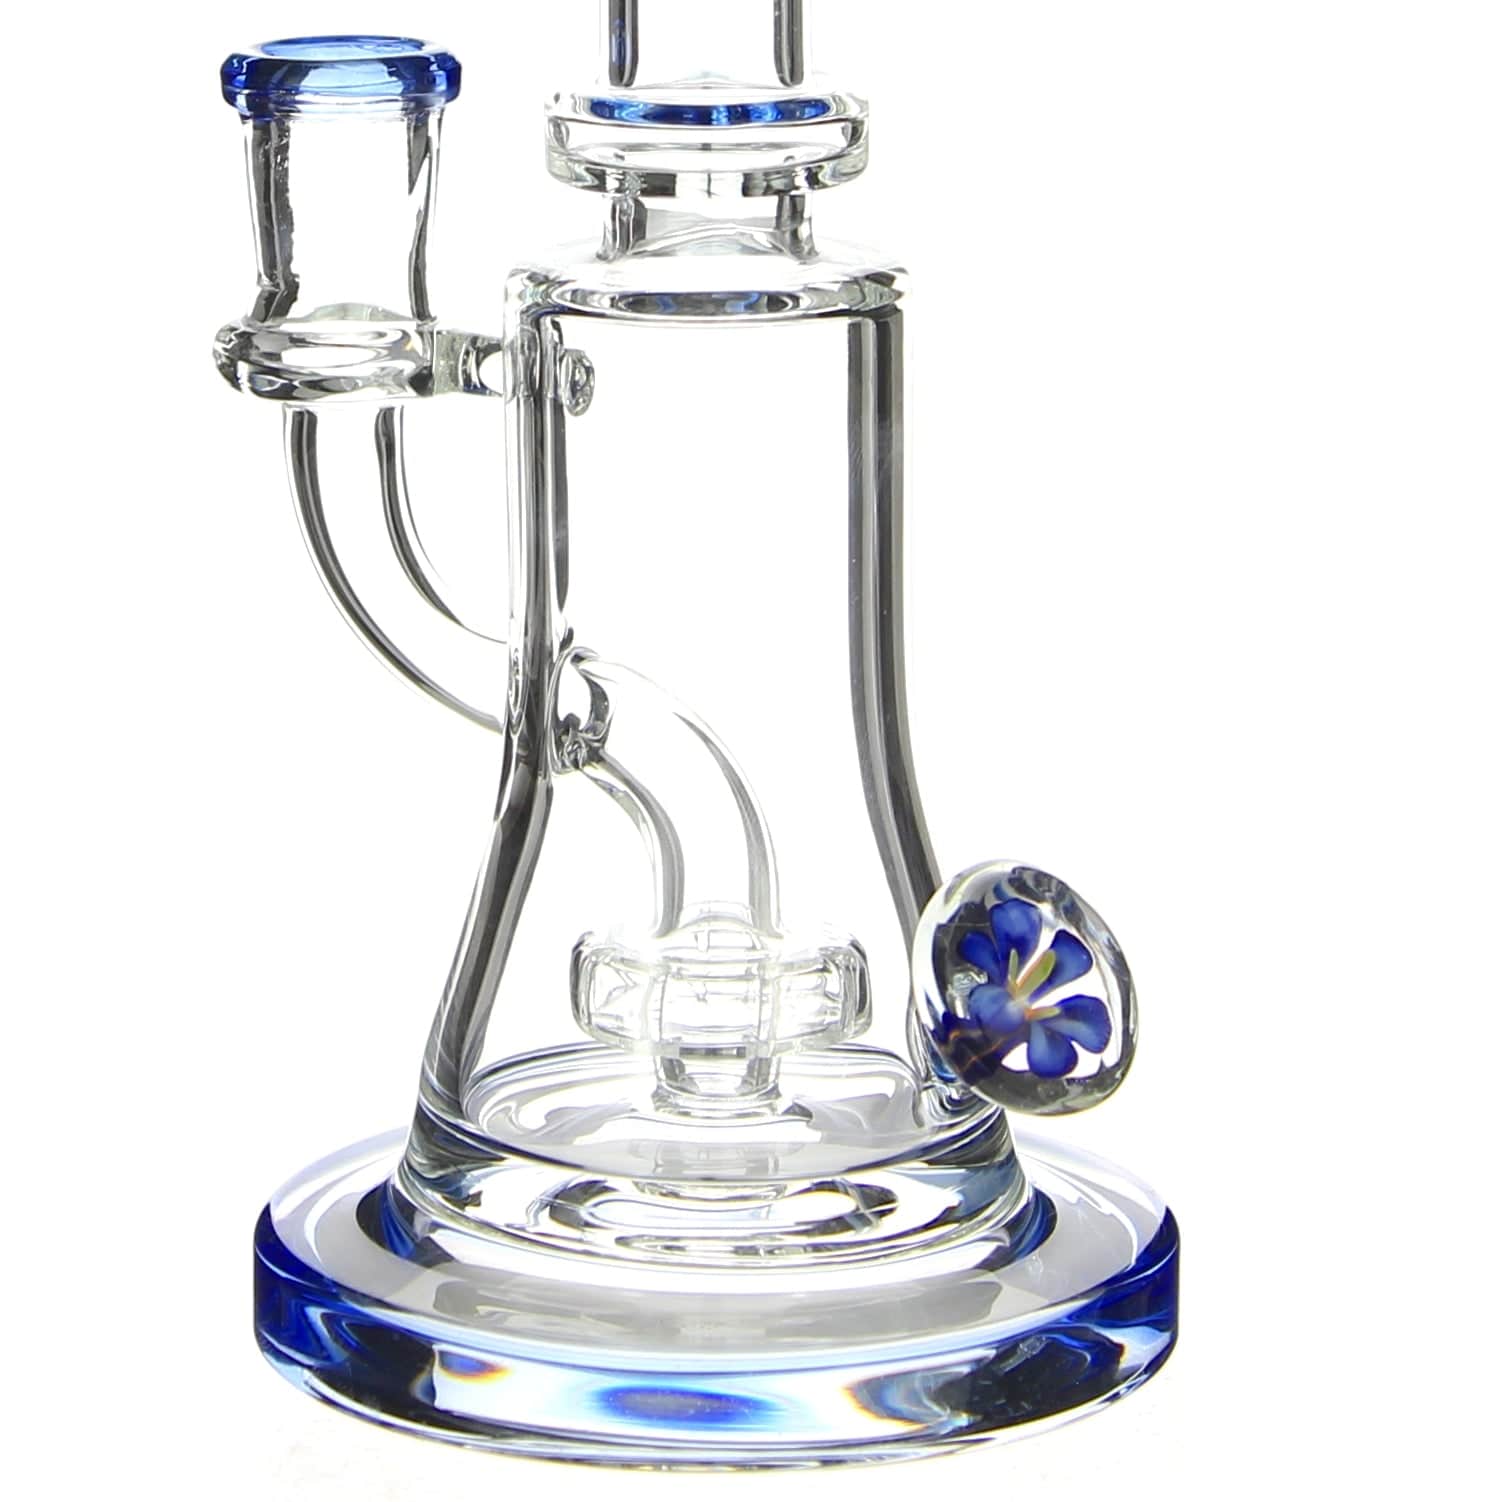 Benext Generation Glass Bell Flower Implosion Dab Rig